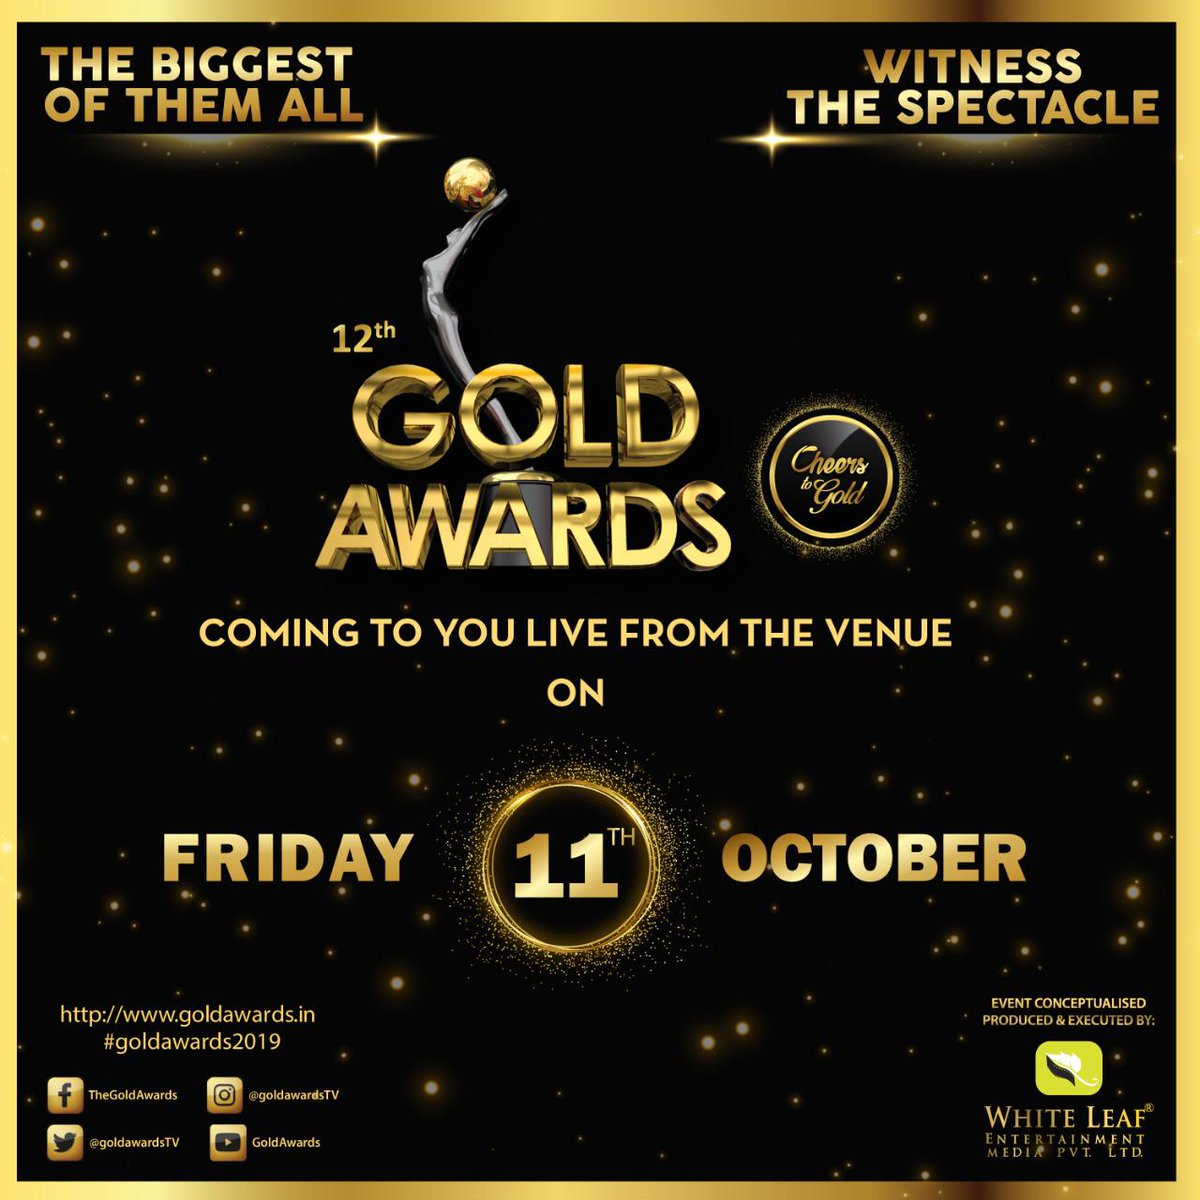 Ready steady go. #dateannouncement #goldawards2019 & we are getting bigger this year by coming to you LIVE from the venue. #performances #awards sab hoga- Date नोट कर लीजिए। आ रहे हैं हम 😊😊✨✨😇😇🙏🏻🙏🏻 @whiteleafent @goldawardstv .
#goldawards2019 #goldawards #12thgoldawards